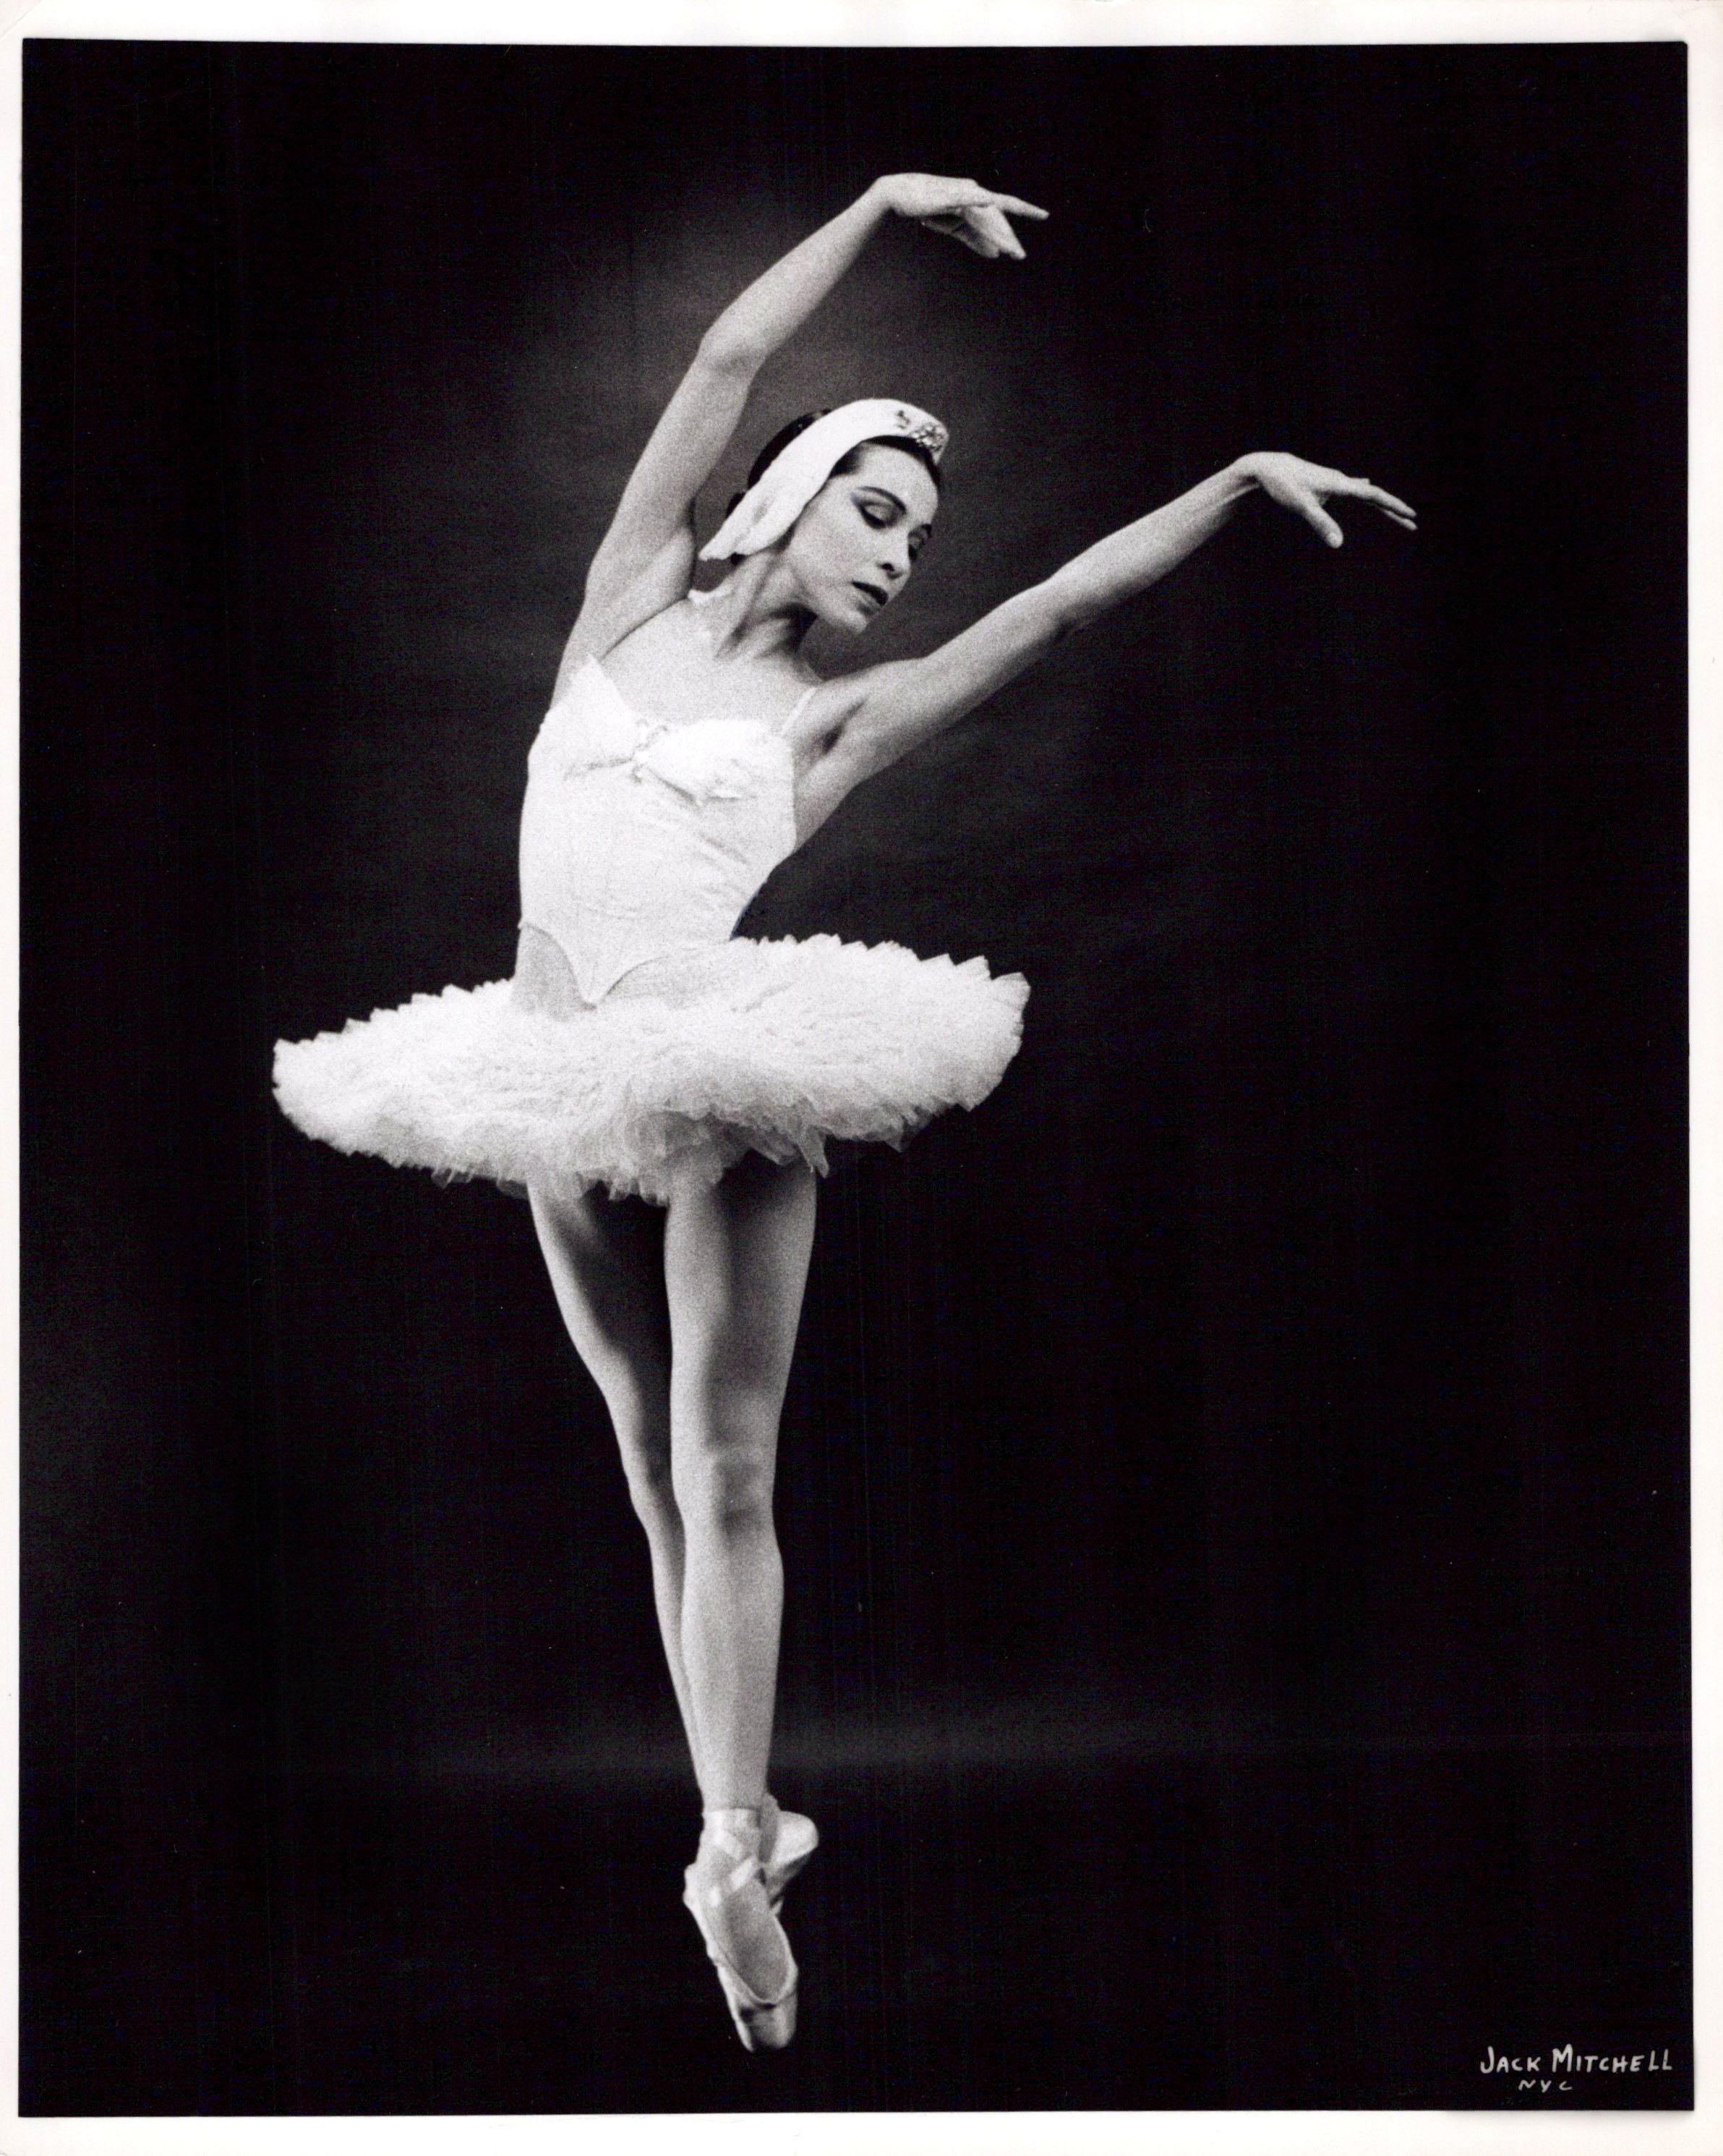 Jack Mitchell Black and White Photograph - Famed Native American Ballerina Maria Tallchief performing 'Swan Lake'